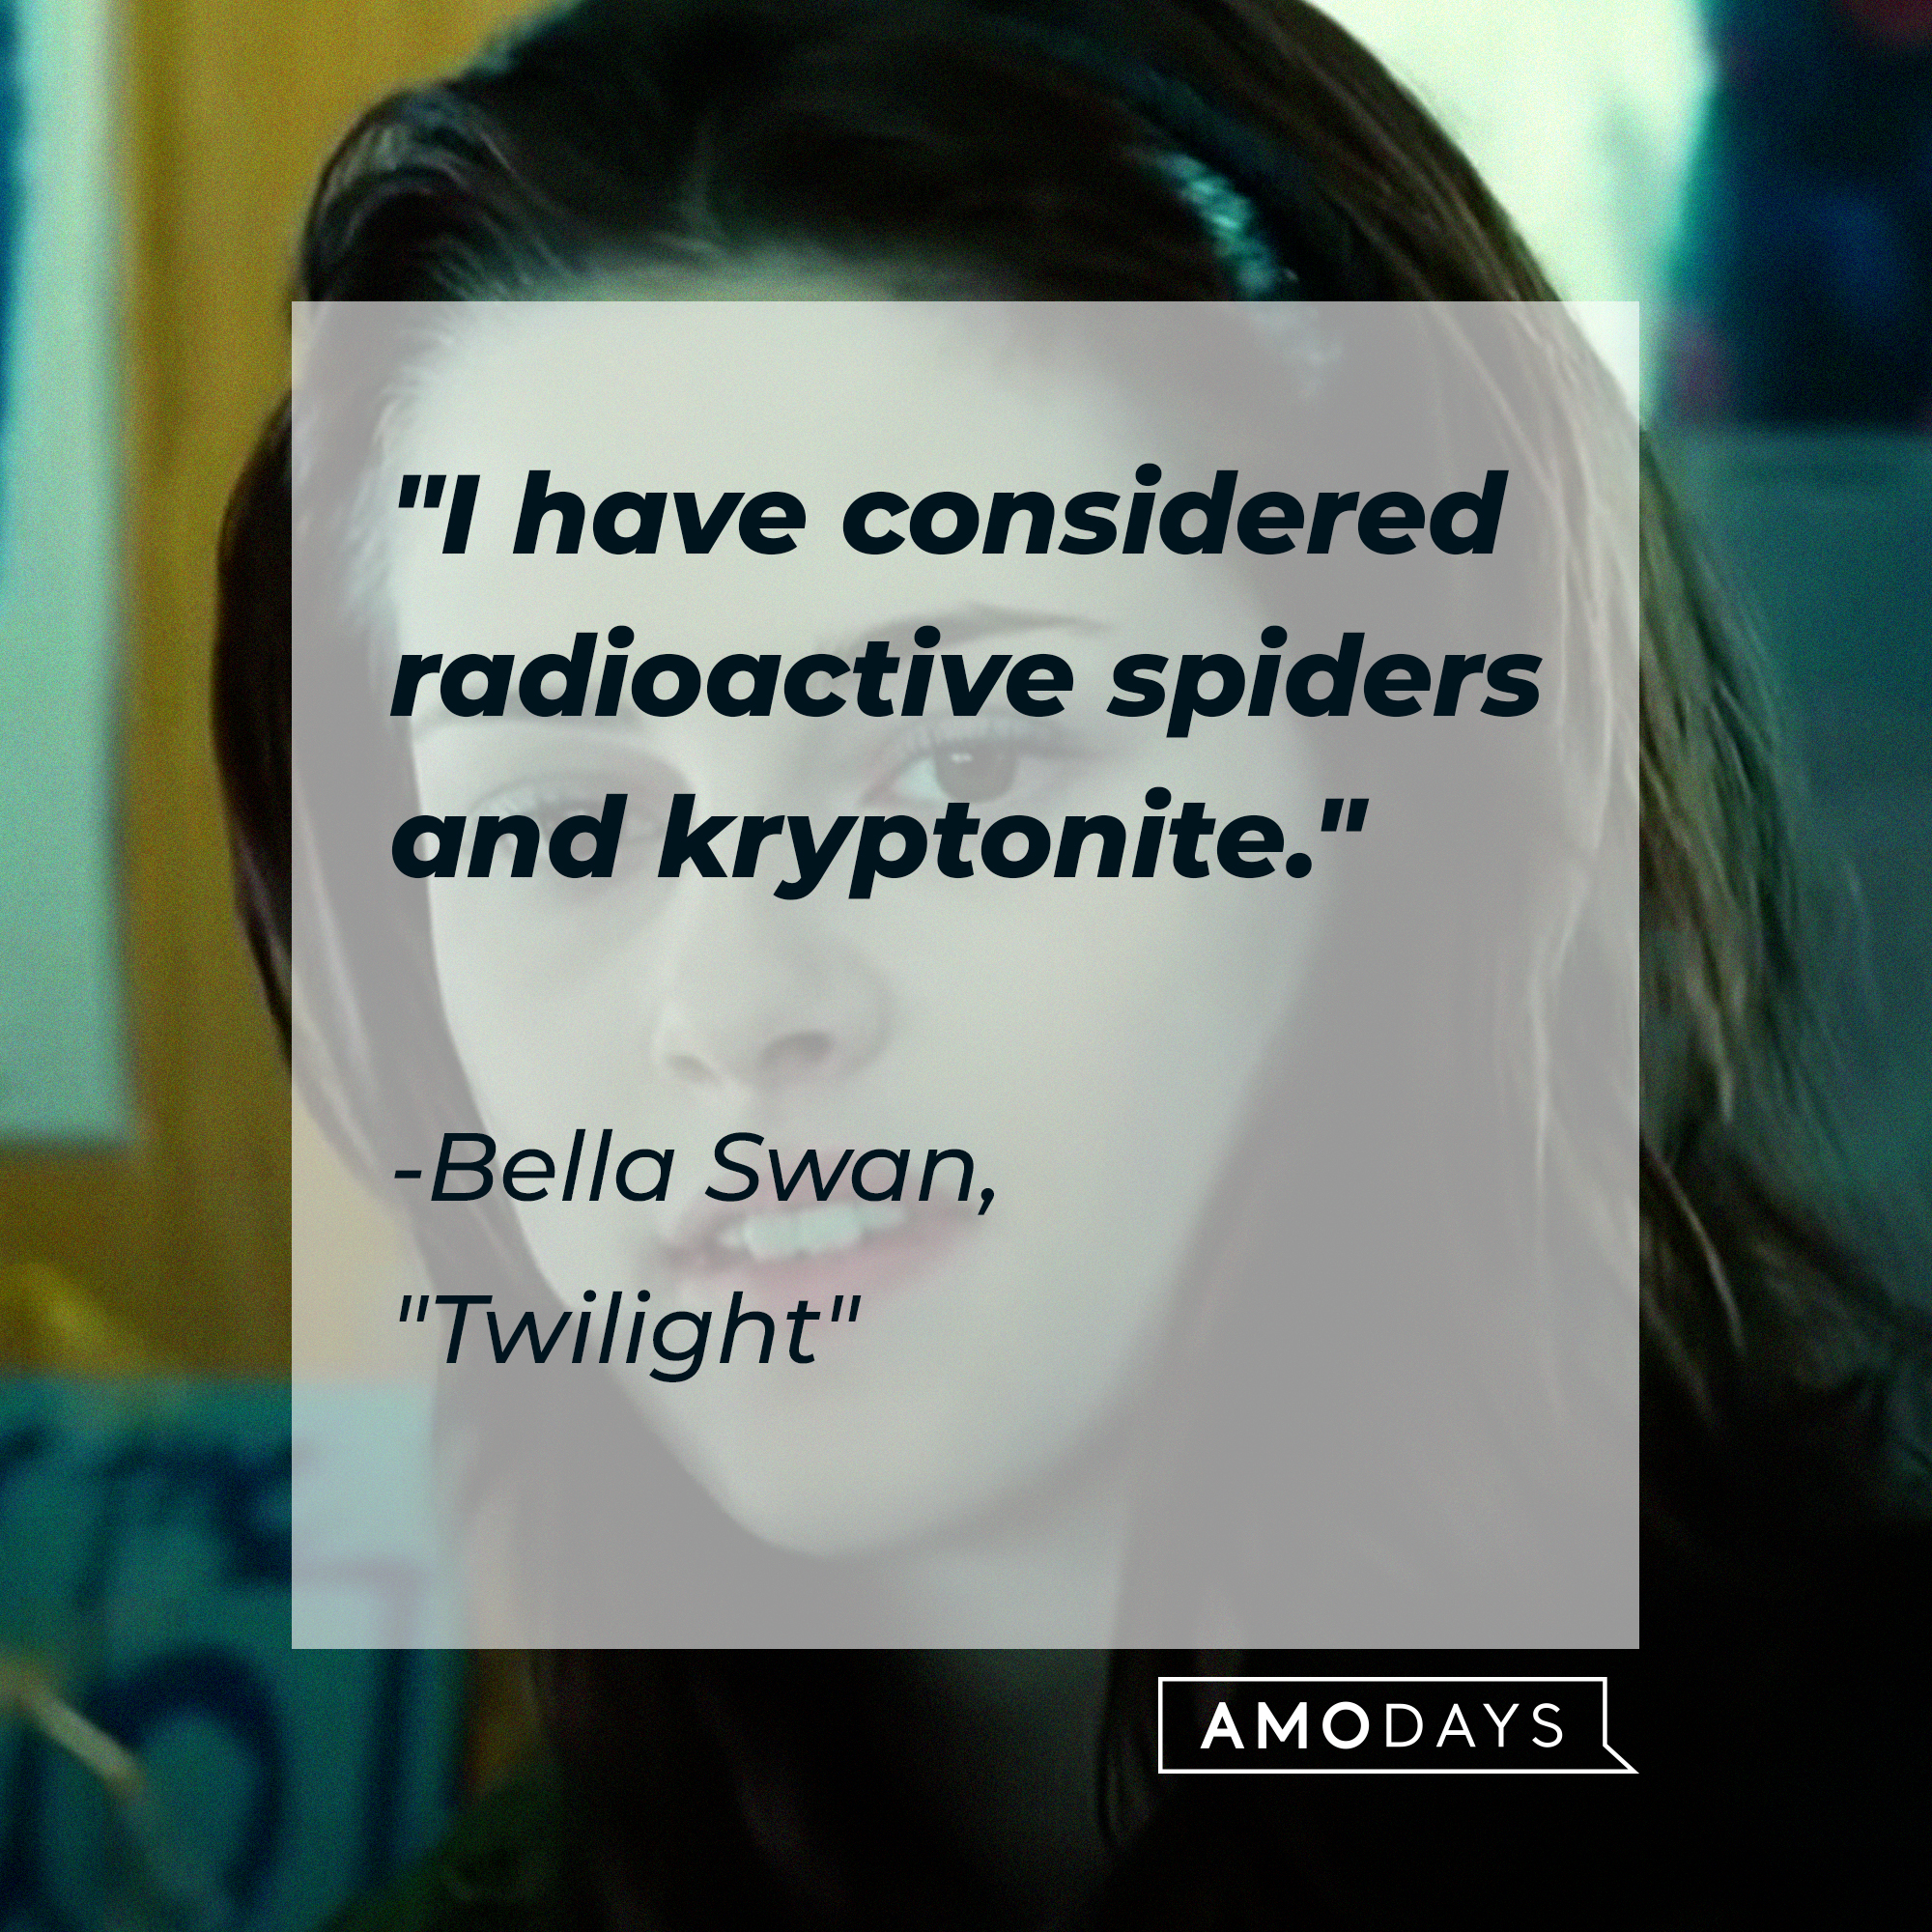 Bella Swan with her quote: "I have considered radioactive spiders and kryptonite." | Source: Facebook.com/twilight